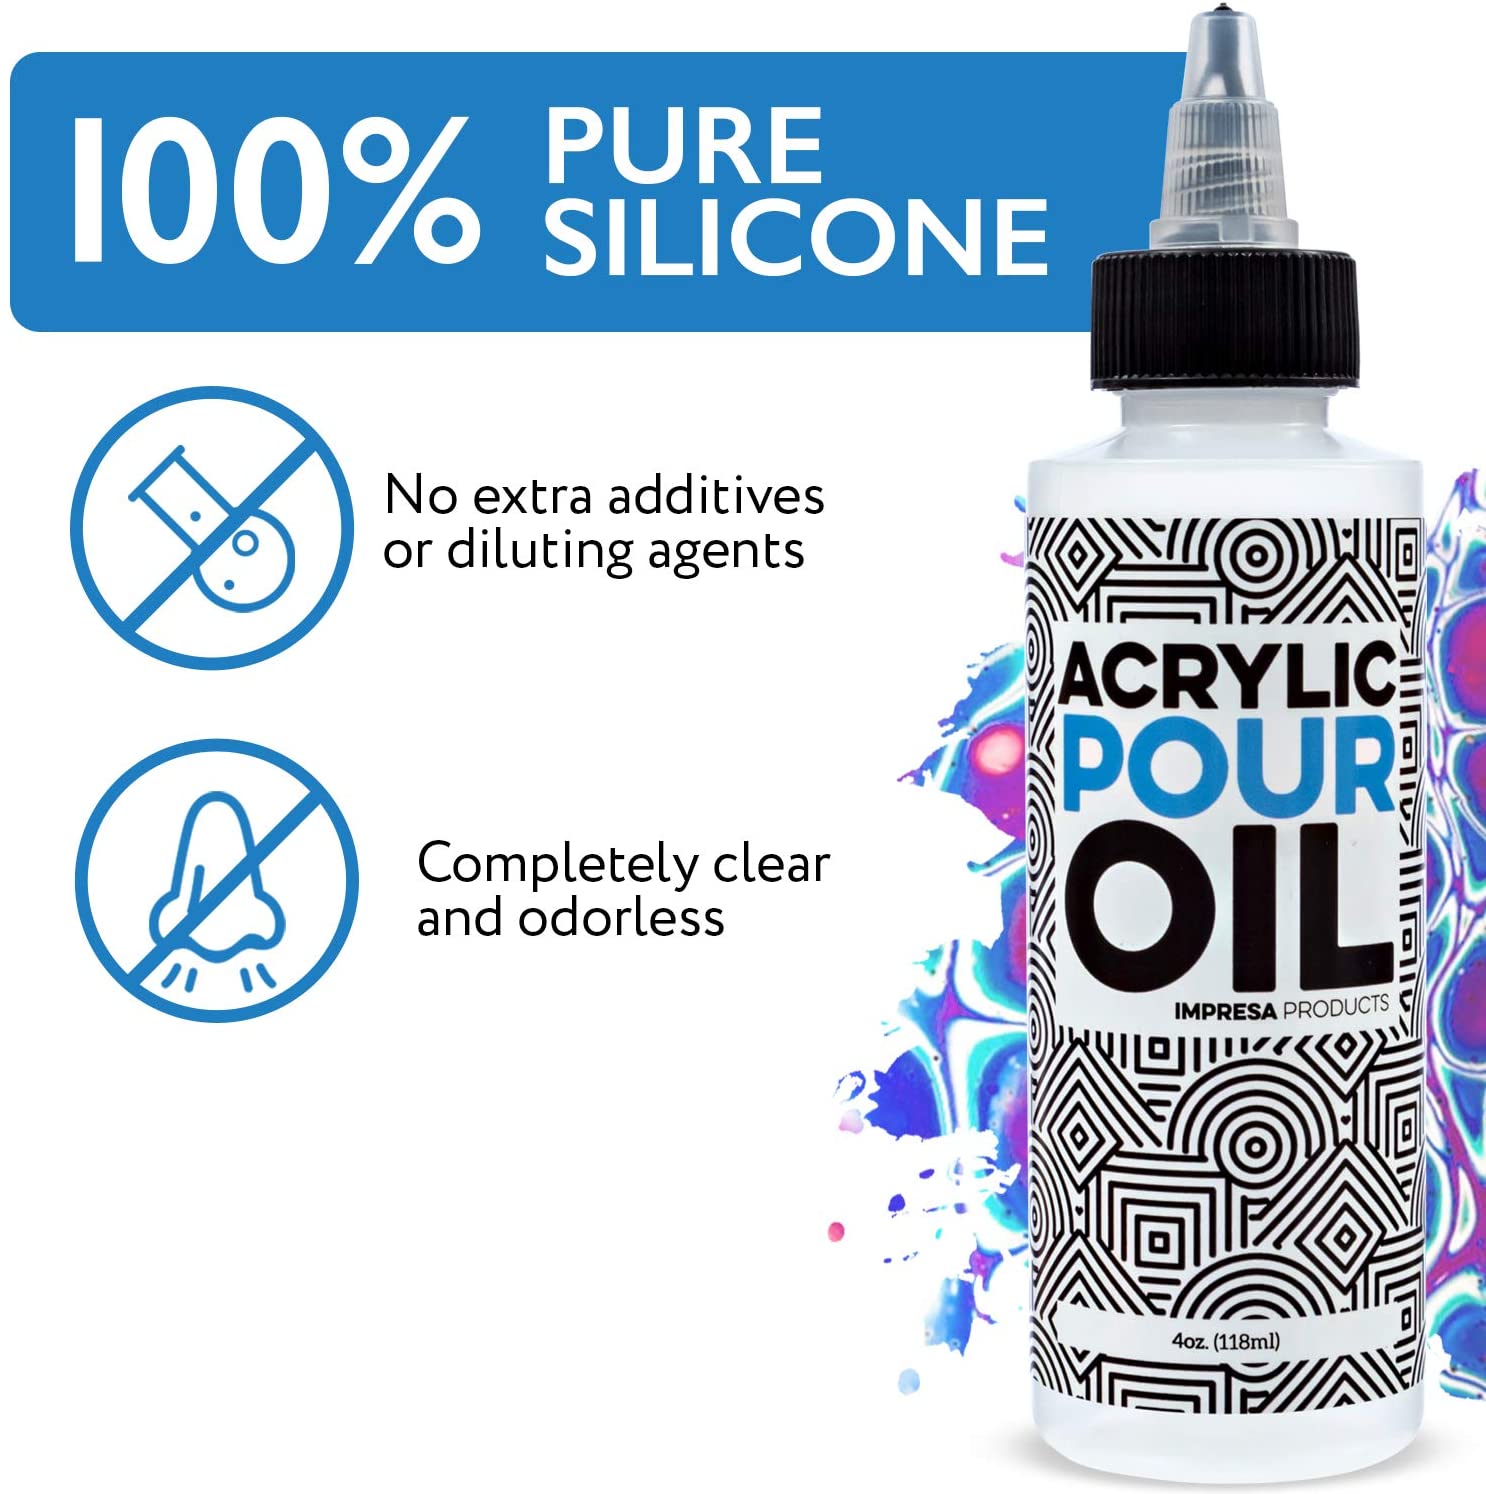 Acrylic Pouring Oil - 100% Silicone - Art Applications - 4 Ounces